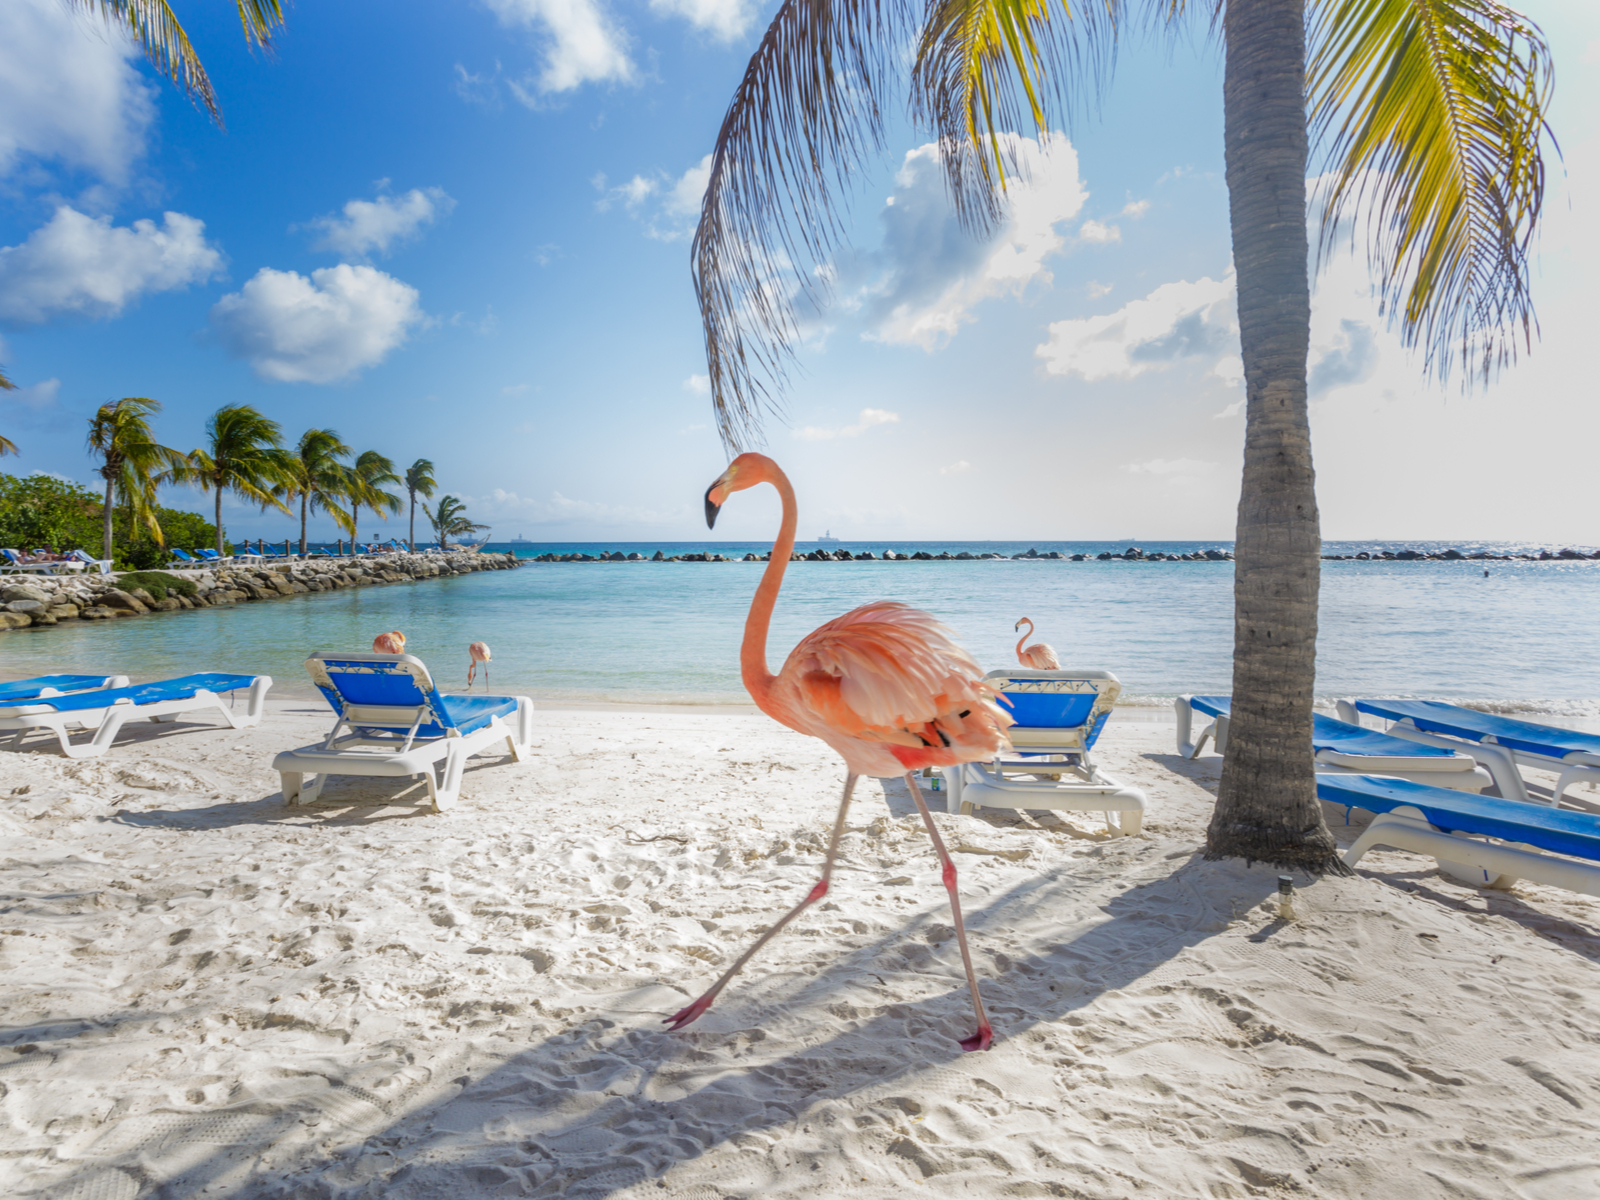 Flamingo walking on a white sand beach on a sunny day in Aruba, one of the Caribbean